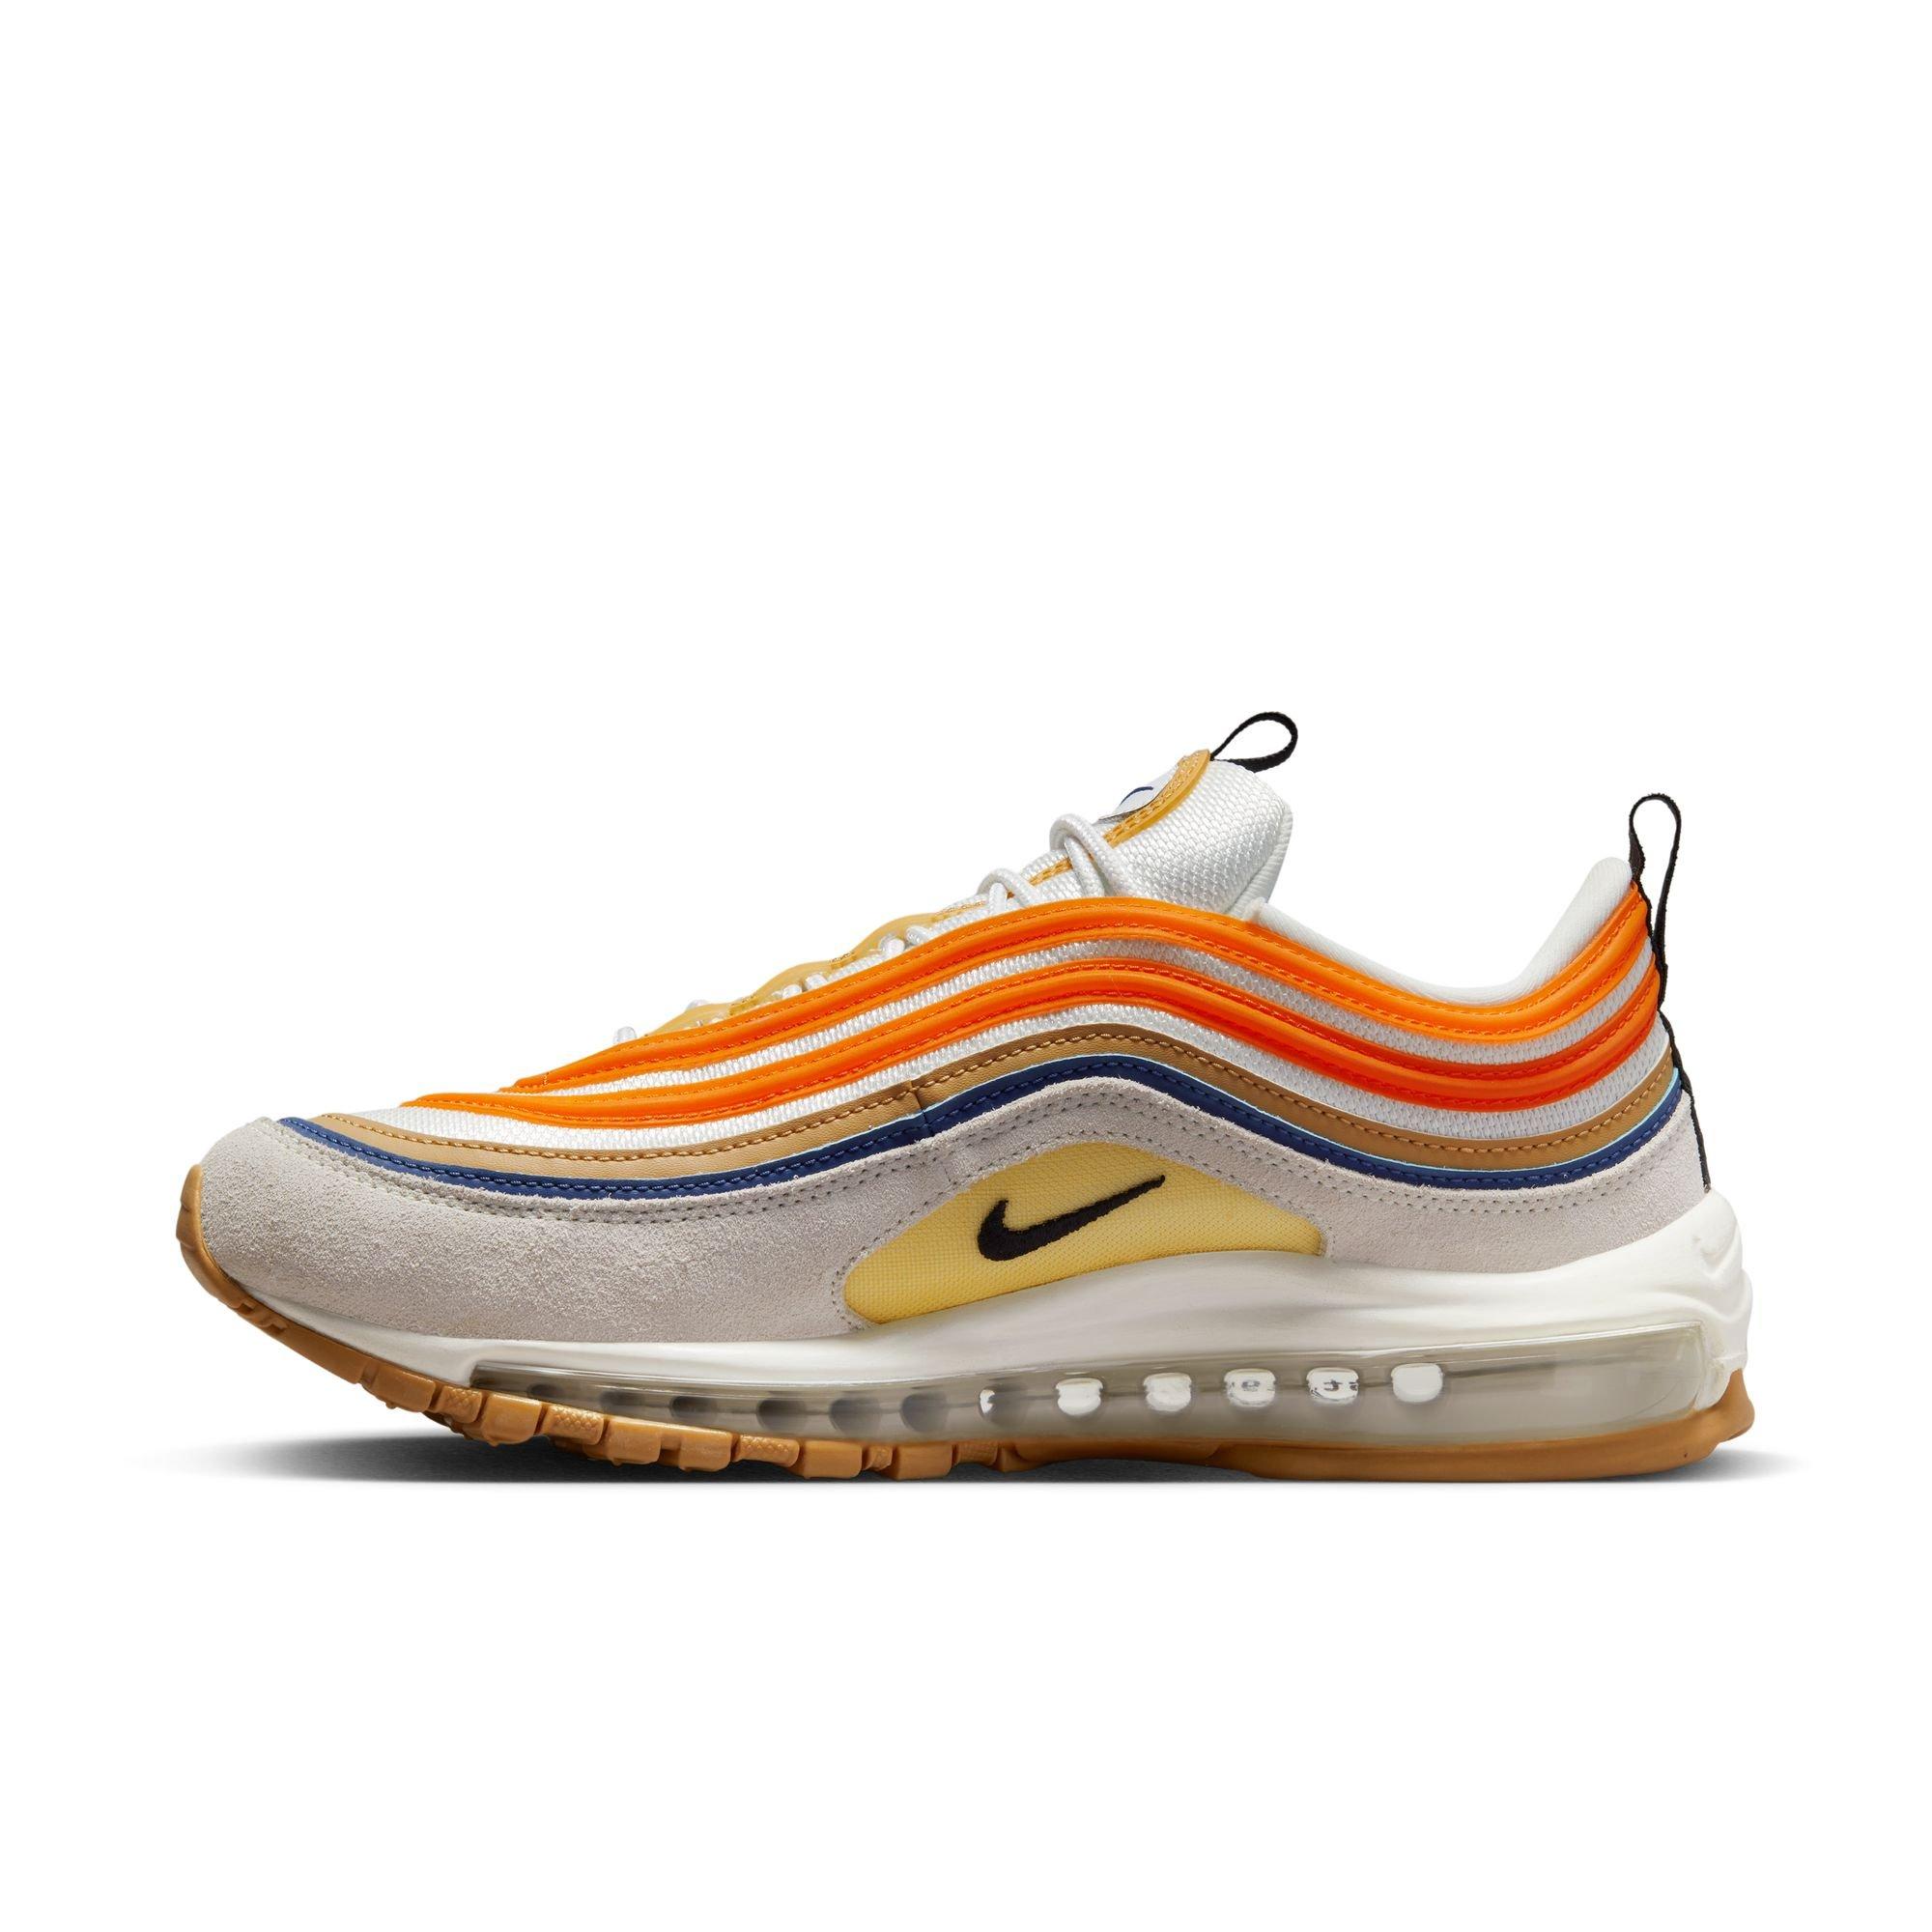 Jayson Tatum's new Air Max 97s pay homage to his hometown of St